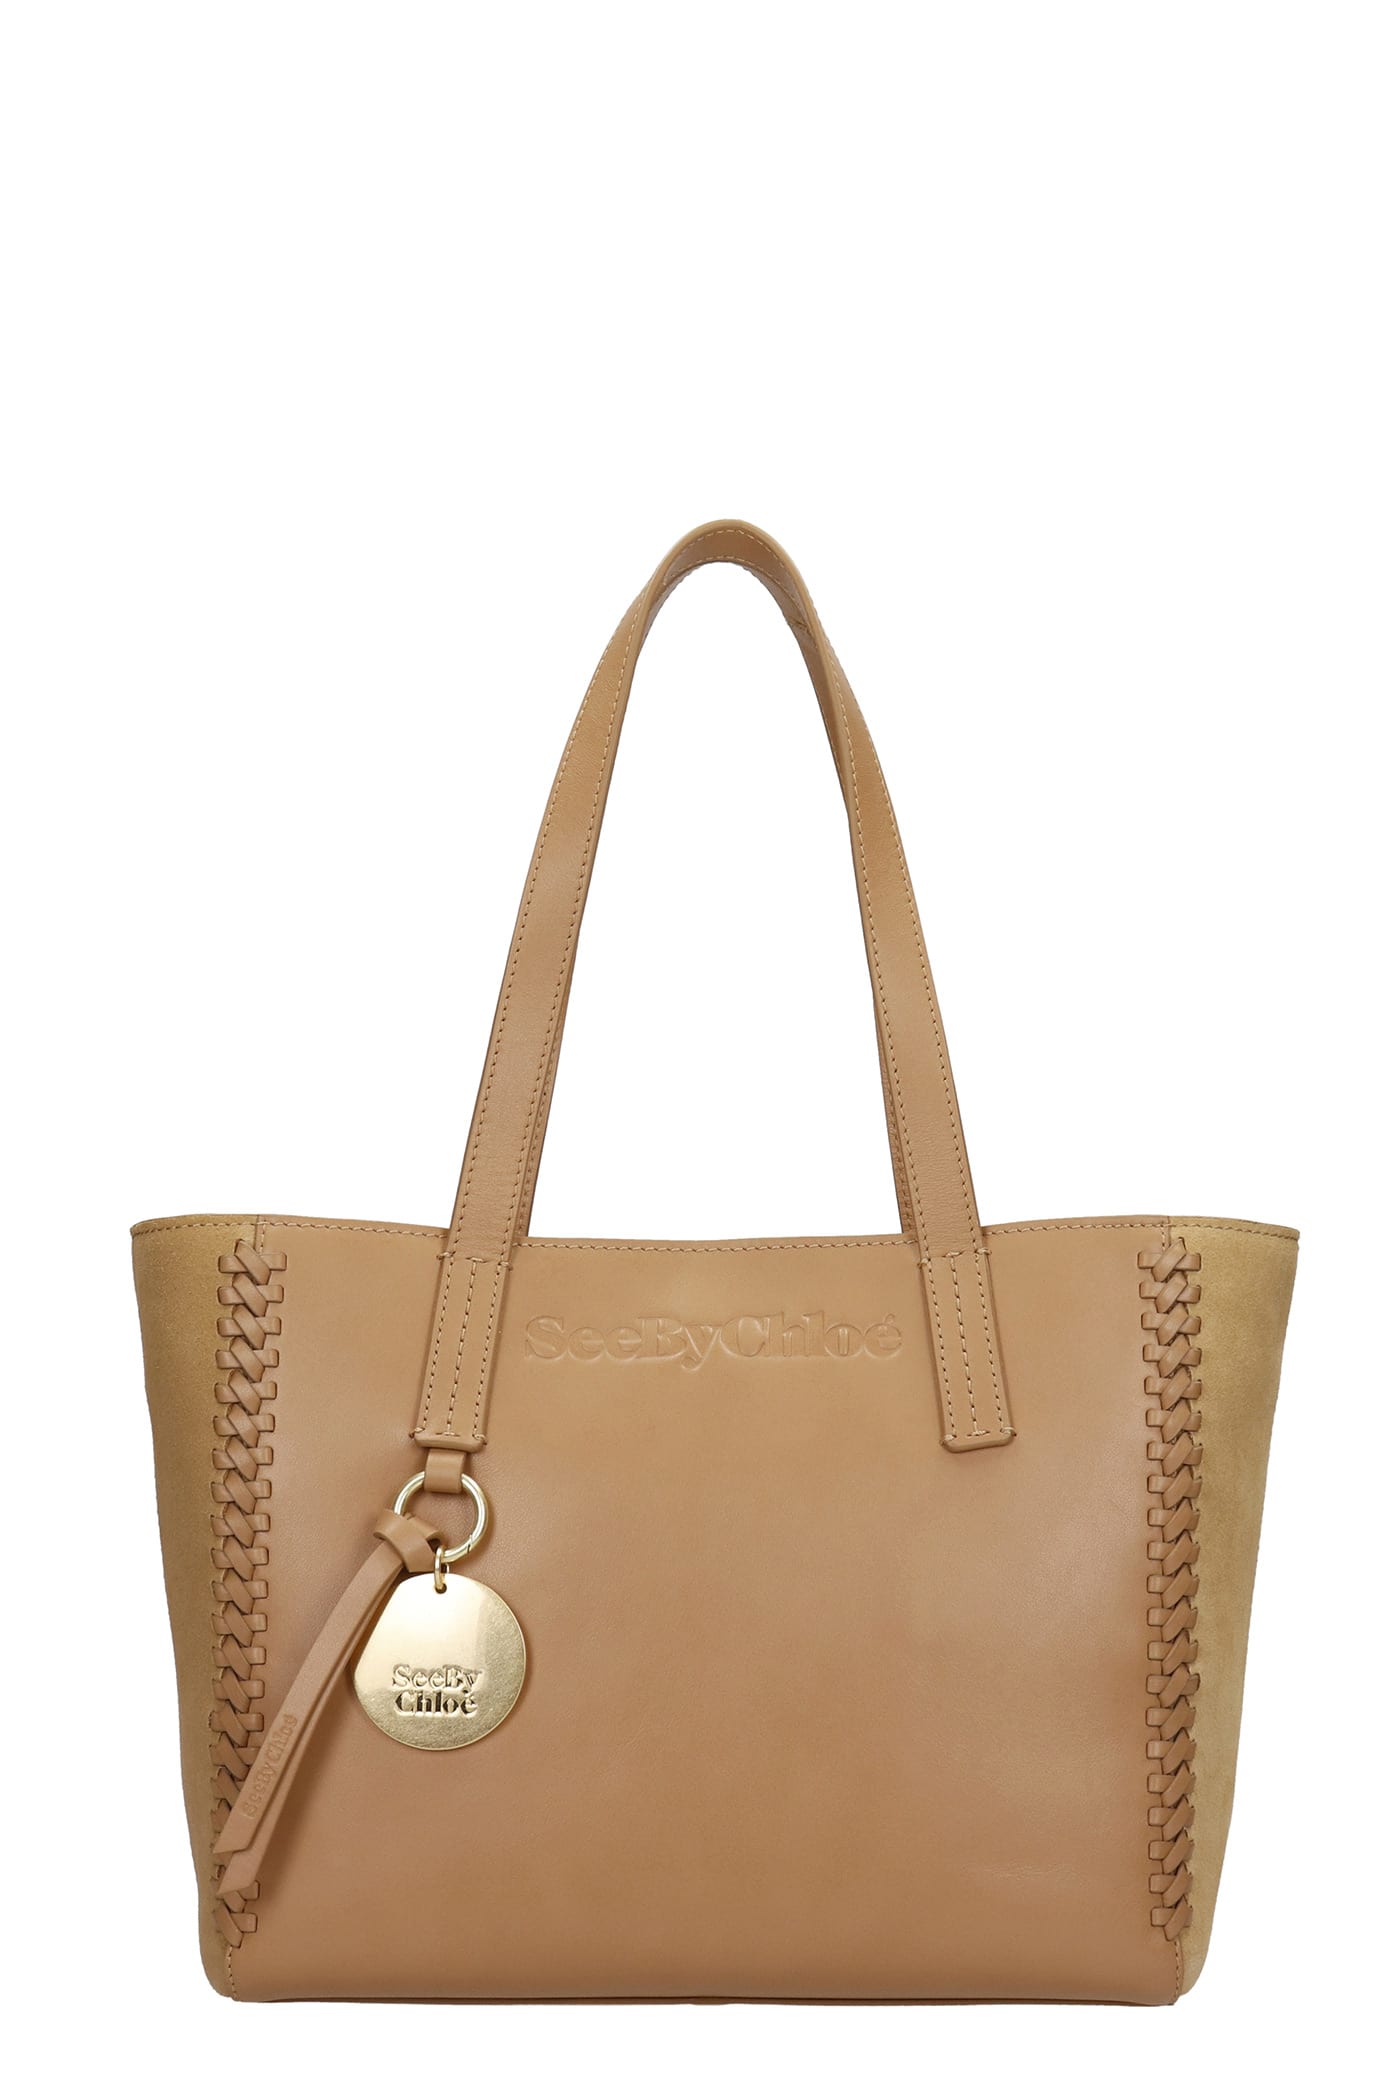 See by Chloé Tilda Tote In Camel Leather